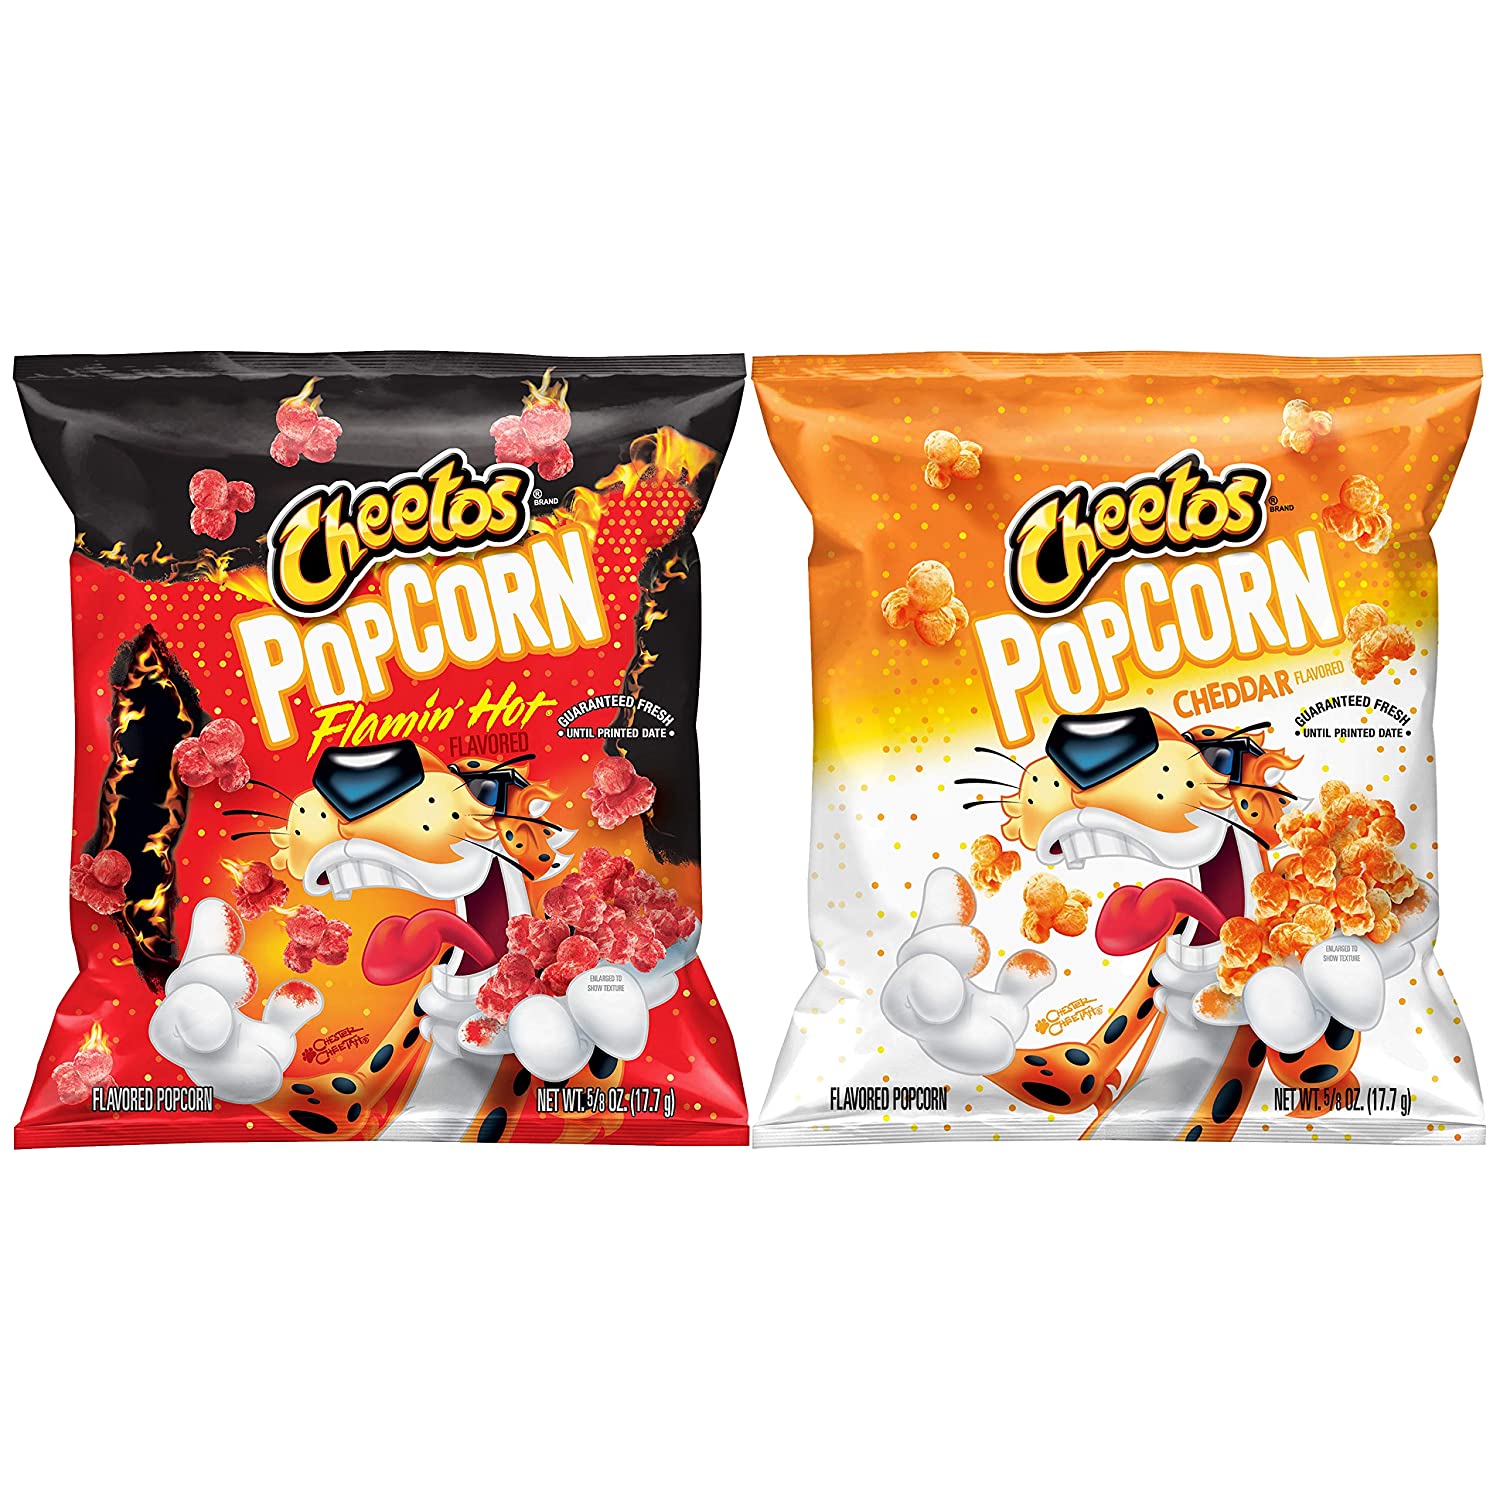 40-Count 0.625oz Cheetos Popcorn (Cheddar & Flamin' Hot Variety Pack) $9.80 w/ S&S + Free Shipping w/ Prime or on $25+ orders